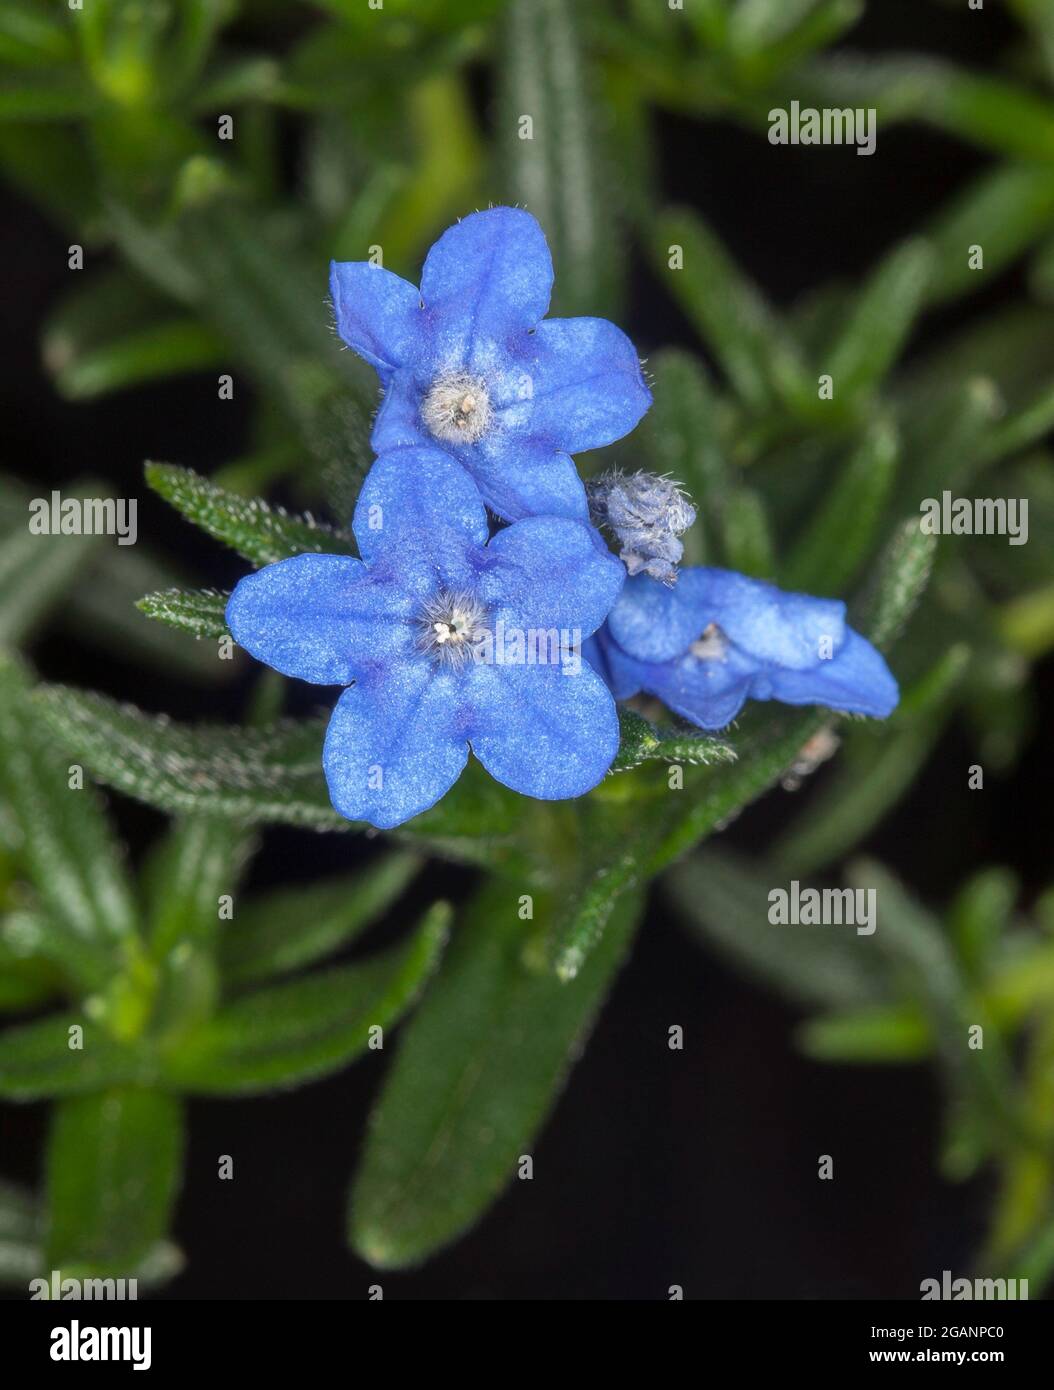 Small yet dazzling blue flowers and vivid green leaves of ground cover plant, Lithodora diffusa 'Grace Ward' in a garden in Australia Stock Photo